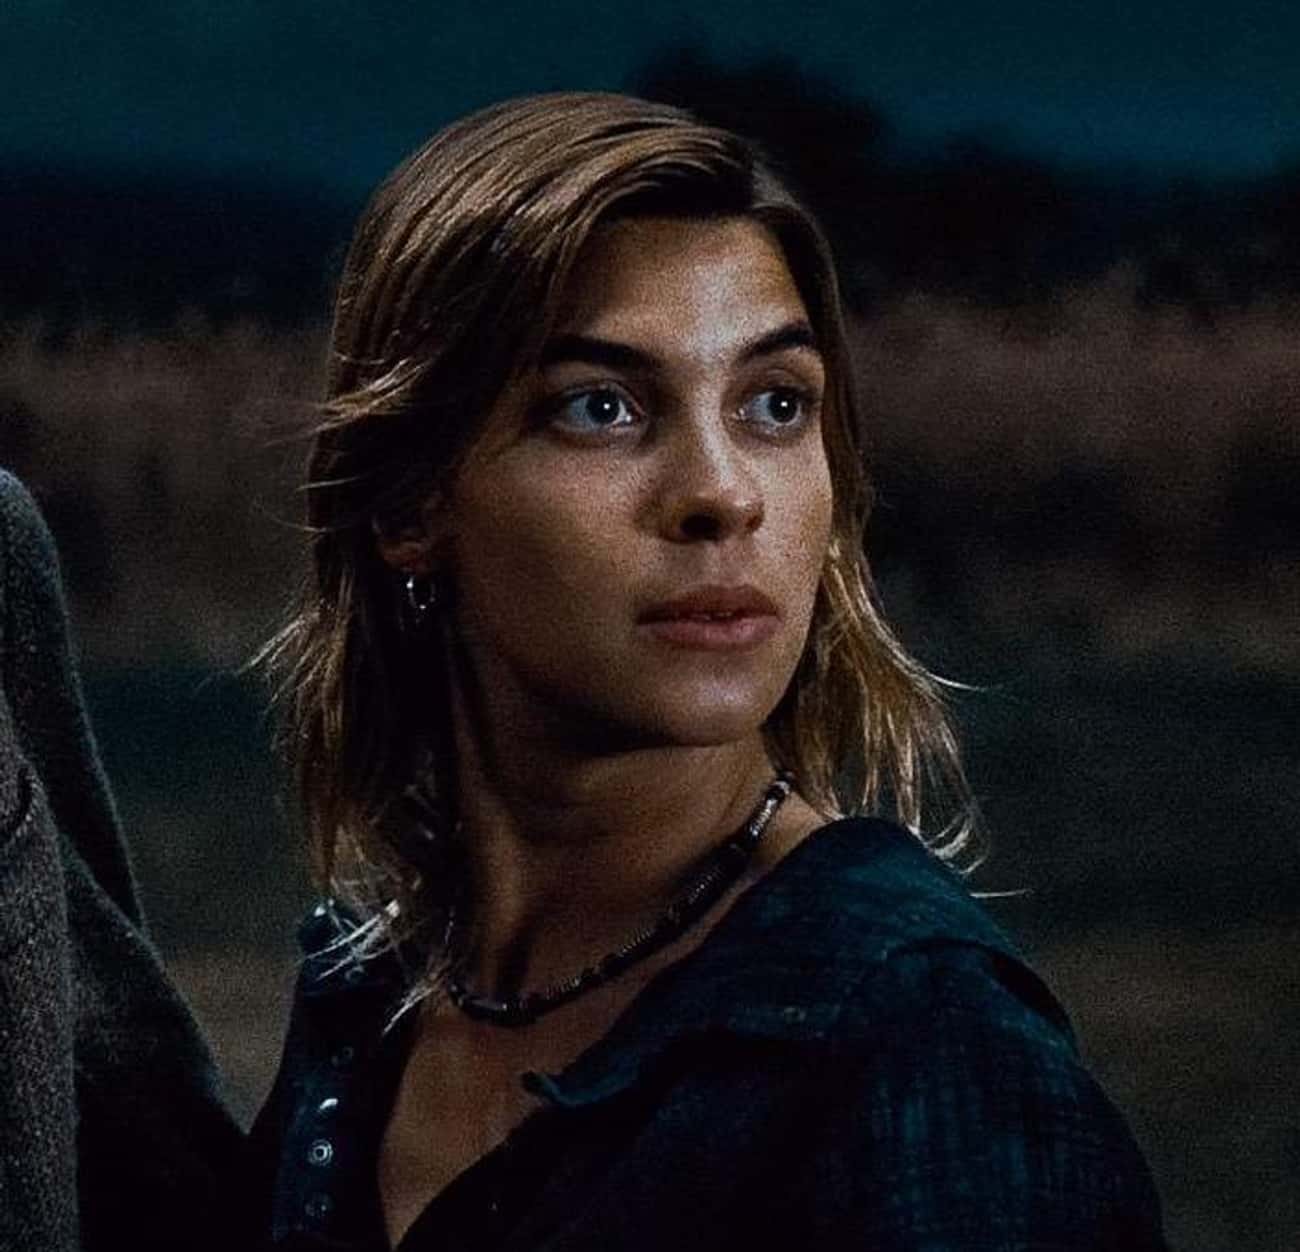 Tonks In The Movies: Muted And Classy